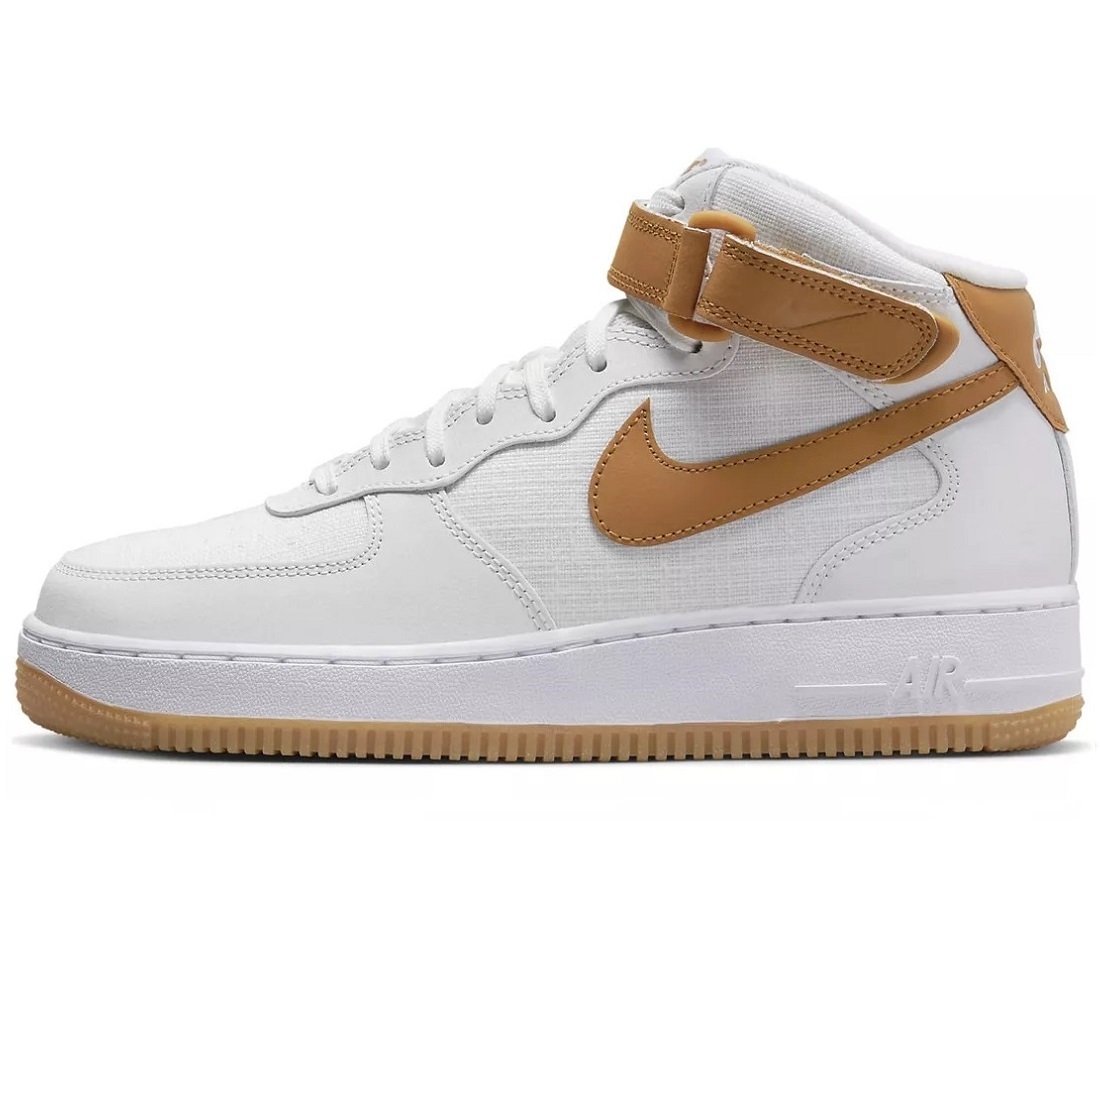 *NIKE WMNS AIR FORCE 1 MID \'07 white / light brown chewing gum sole 24.0cm Nike wi men's Air Force 1 mid 07 DD9625-102